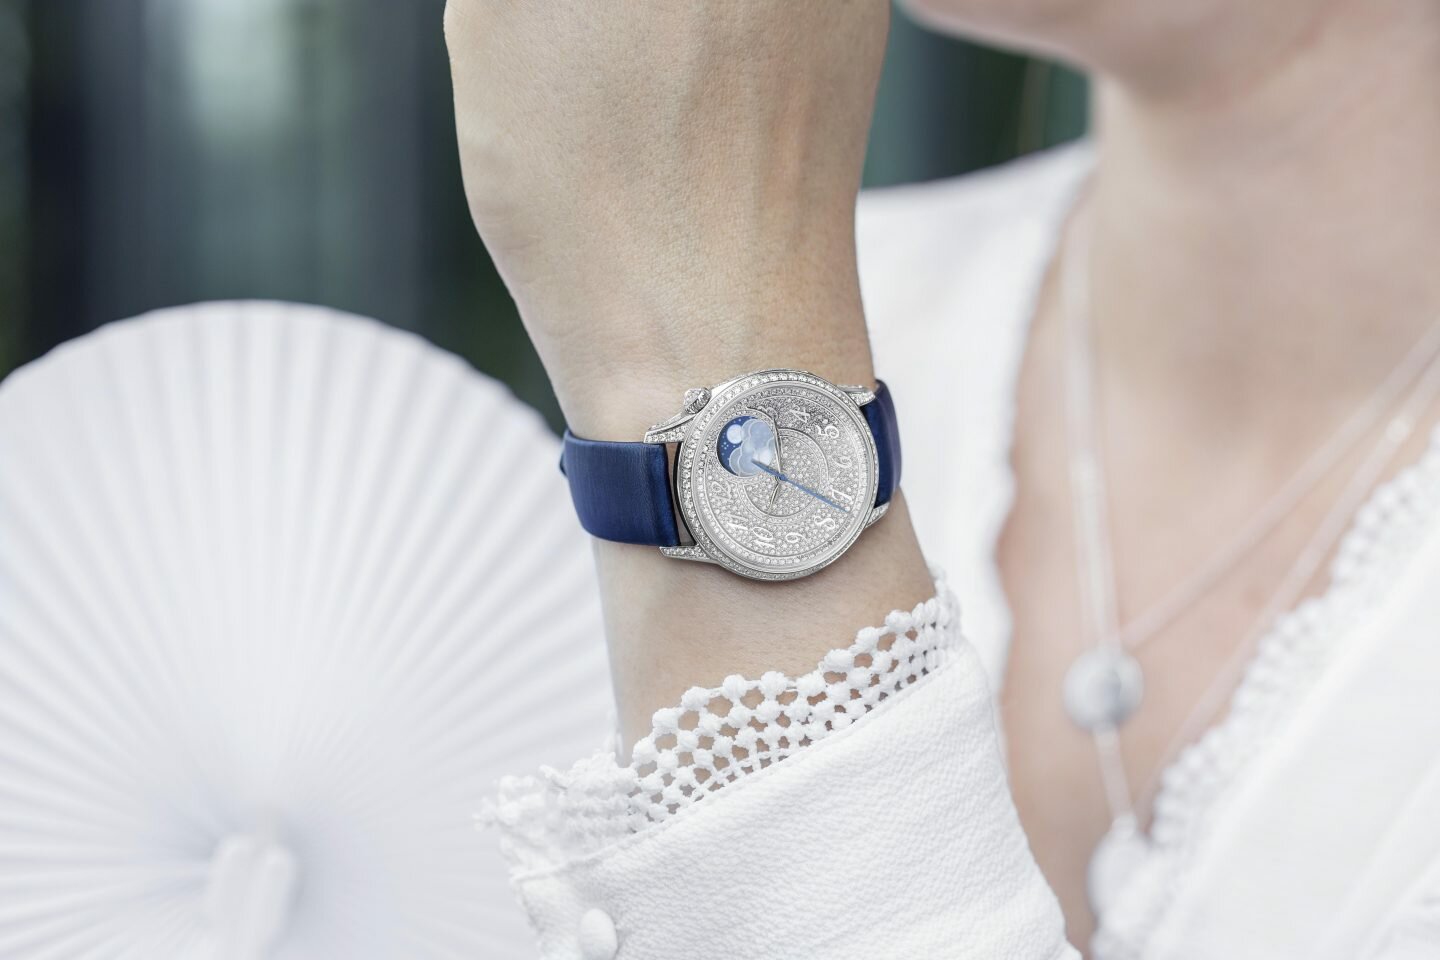 Vacheron Constantin Shows Off The Strength Of A Woman